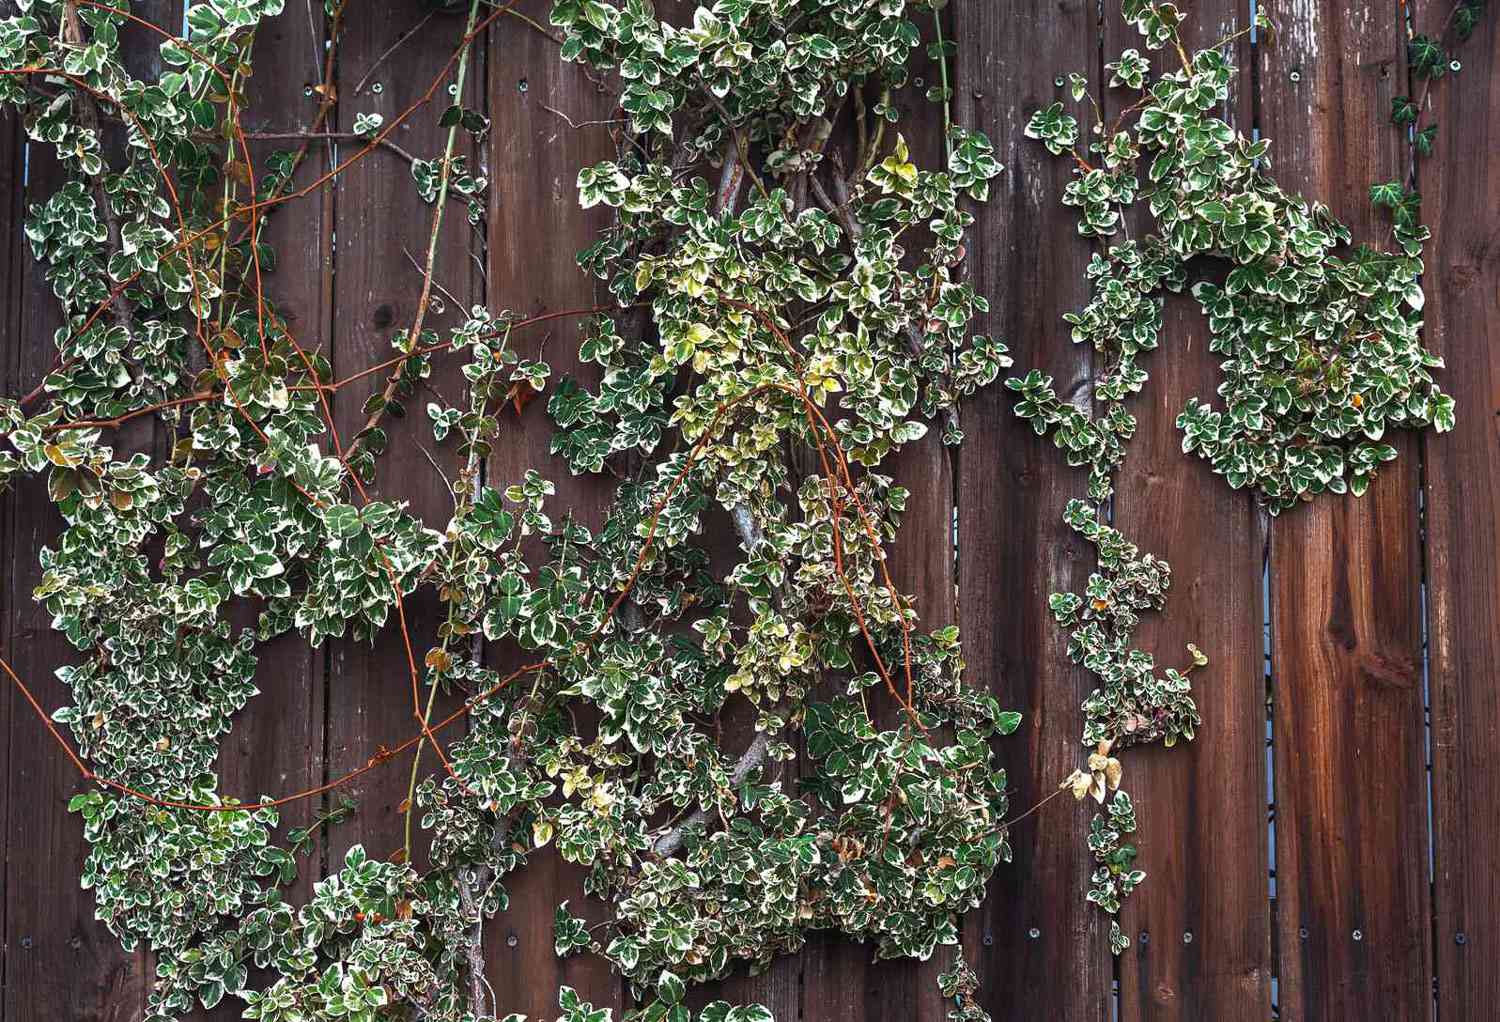 Emerald gaiety euonymus vines climbing dark wood fence with small green and white leaves